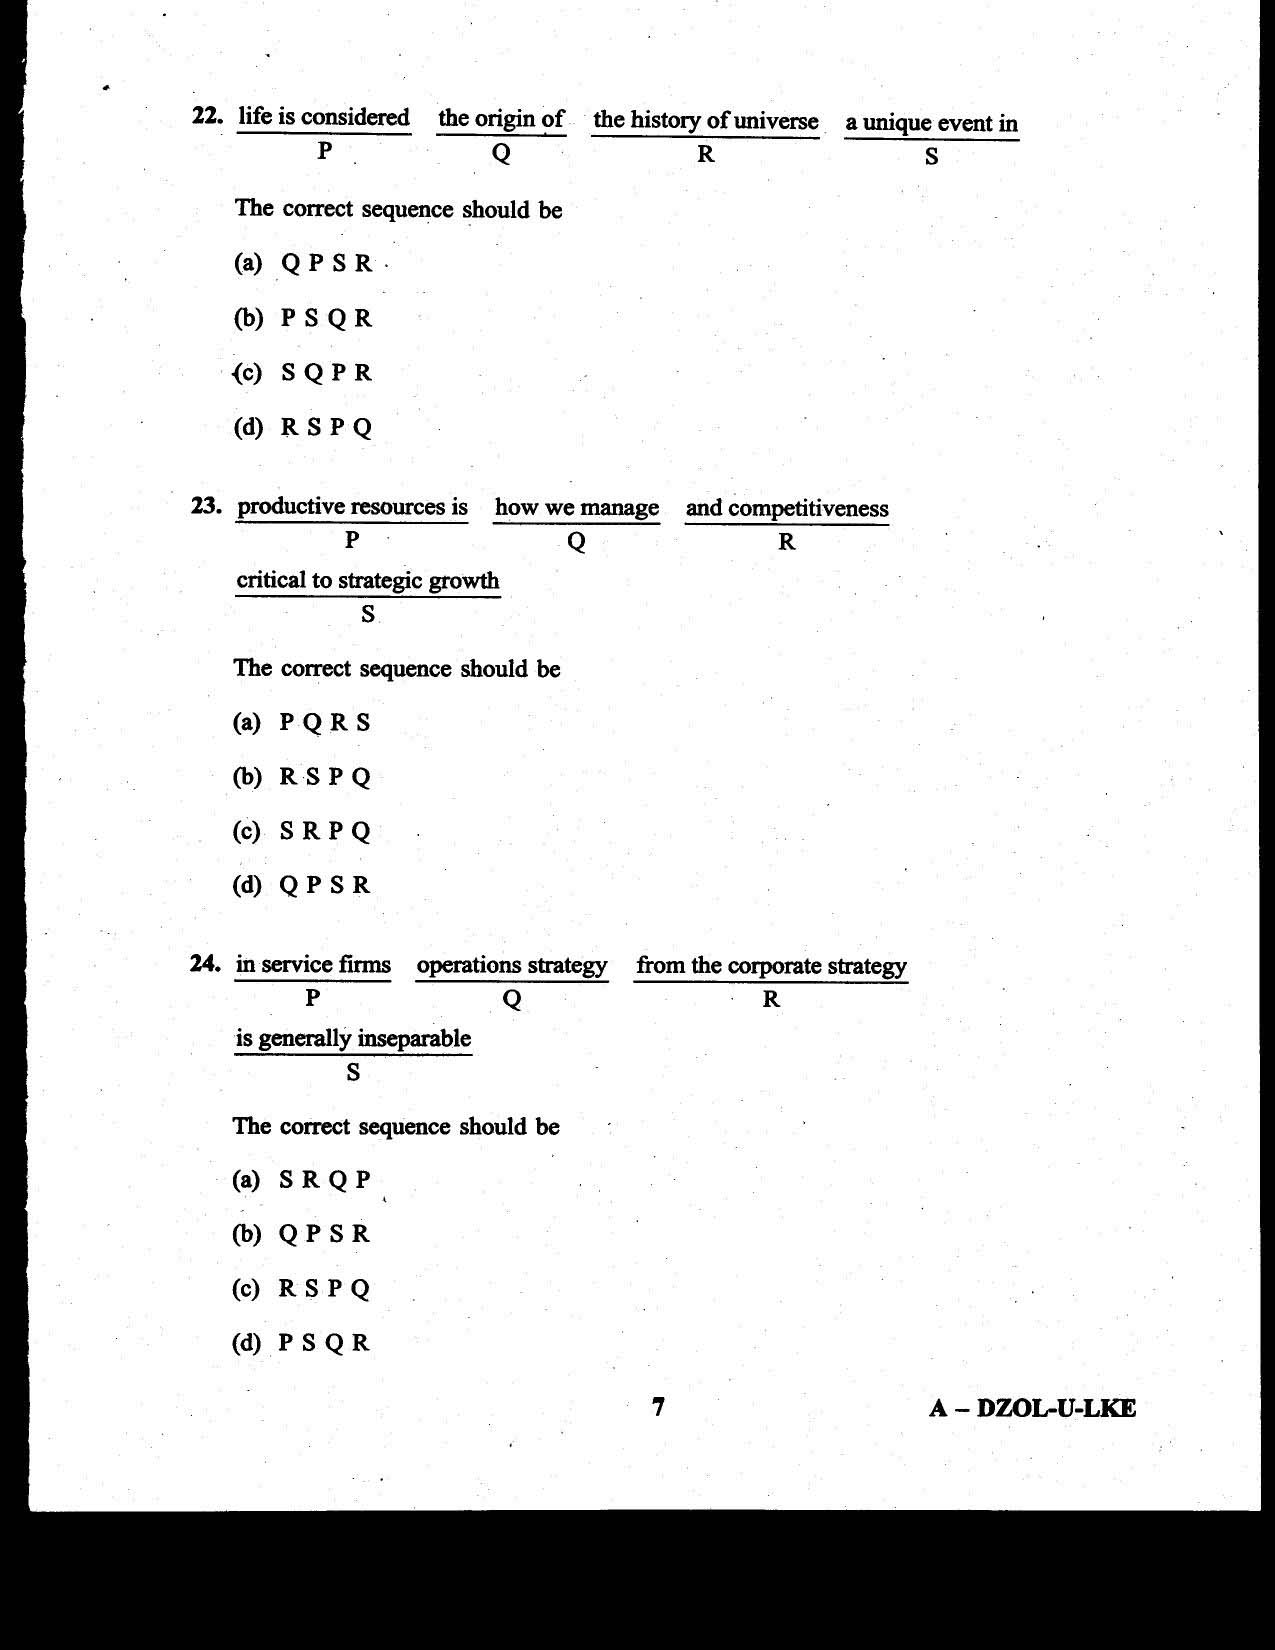 CDS II Examination 2020 English Question Paper - Image 7